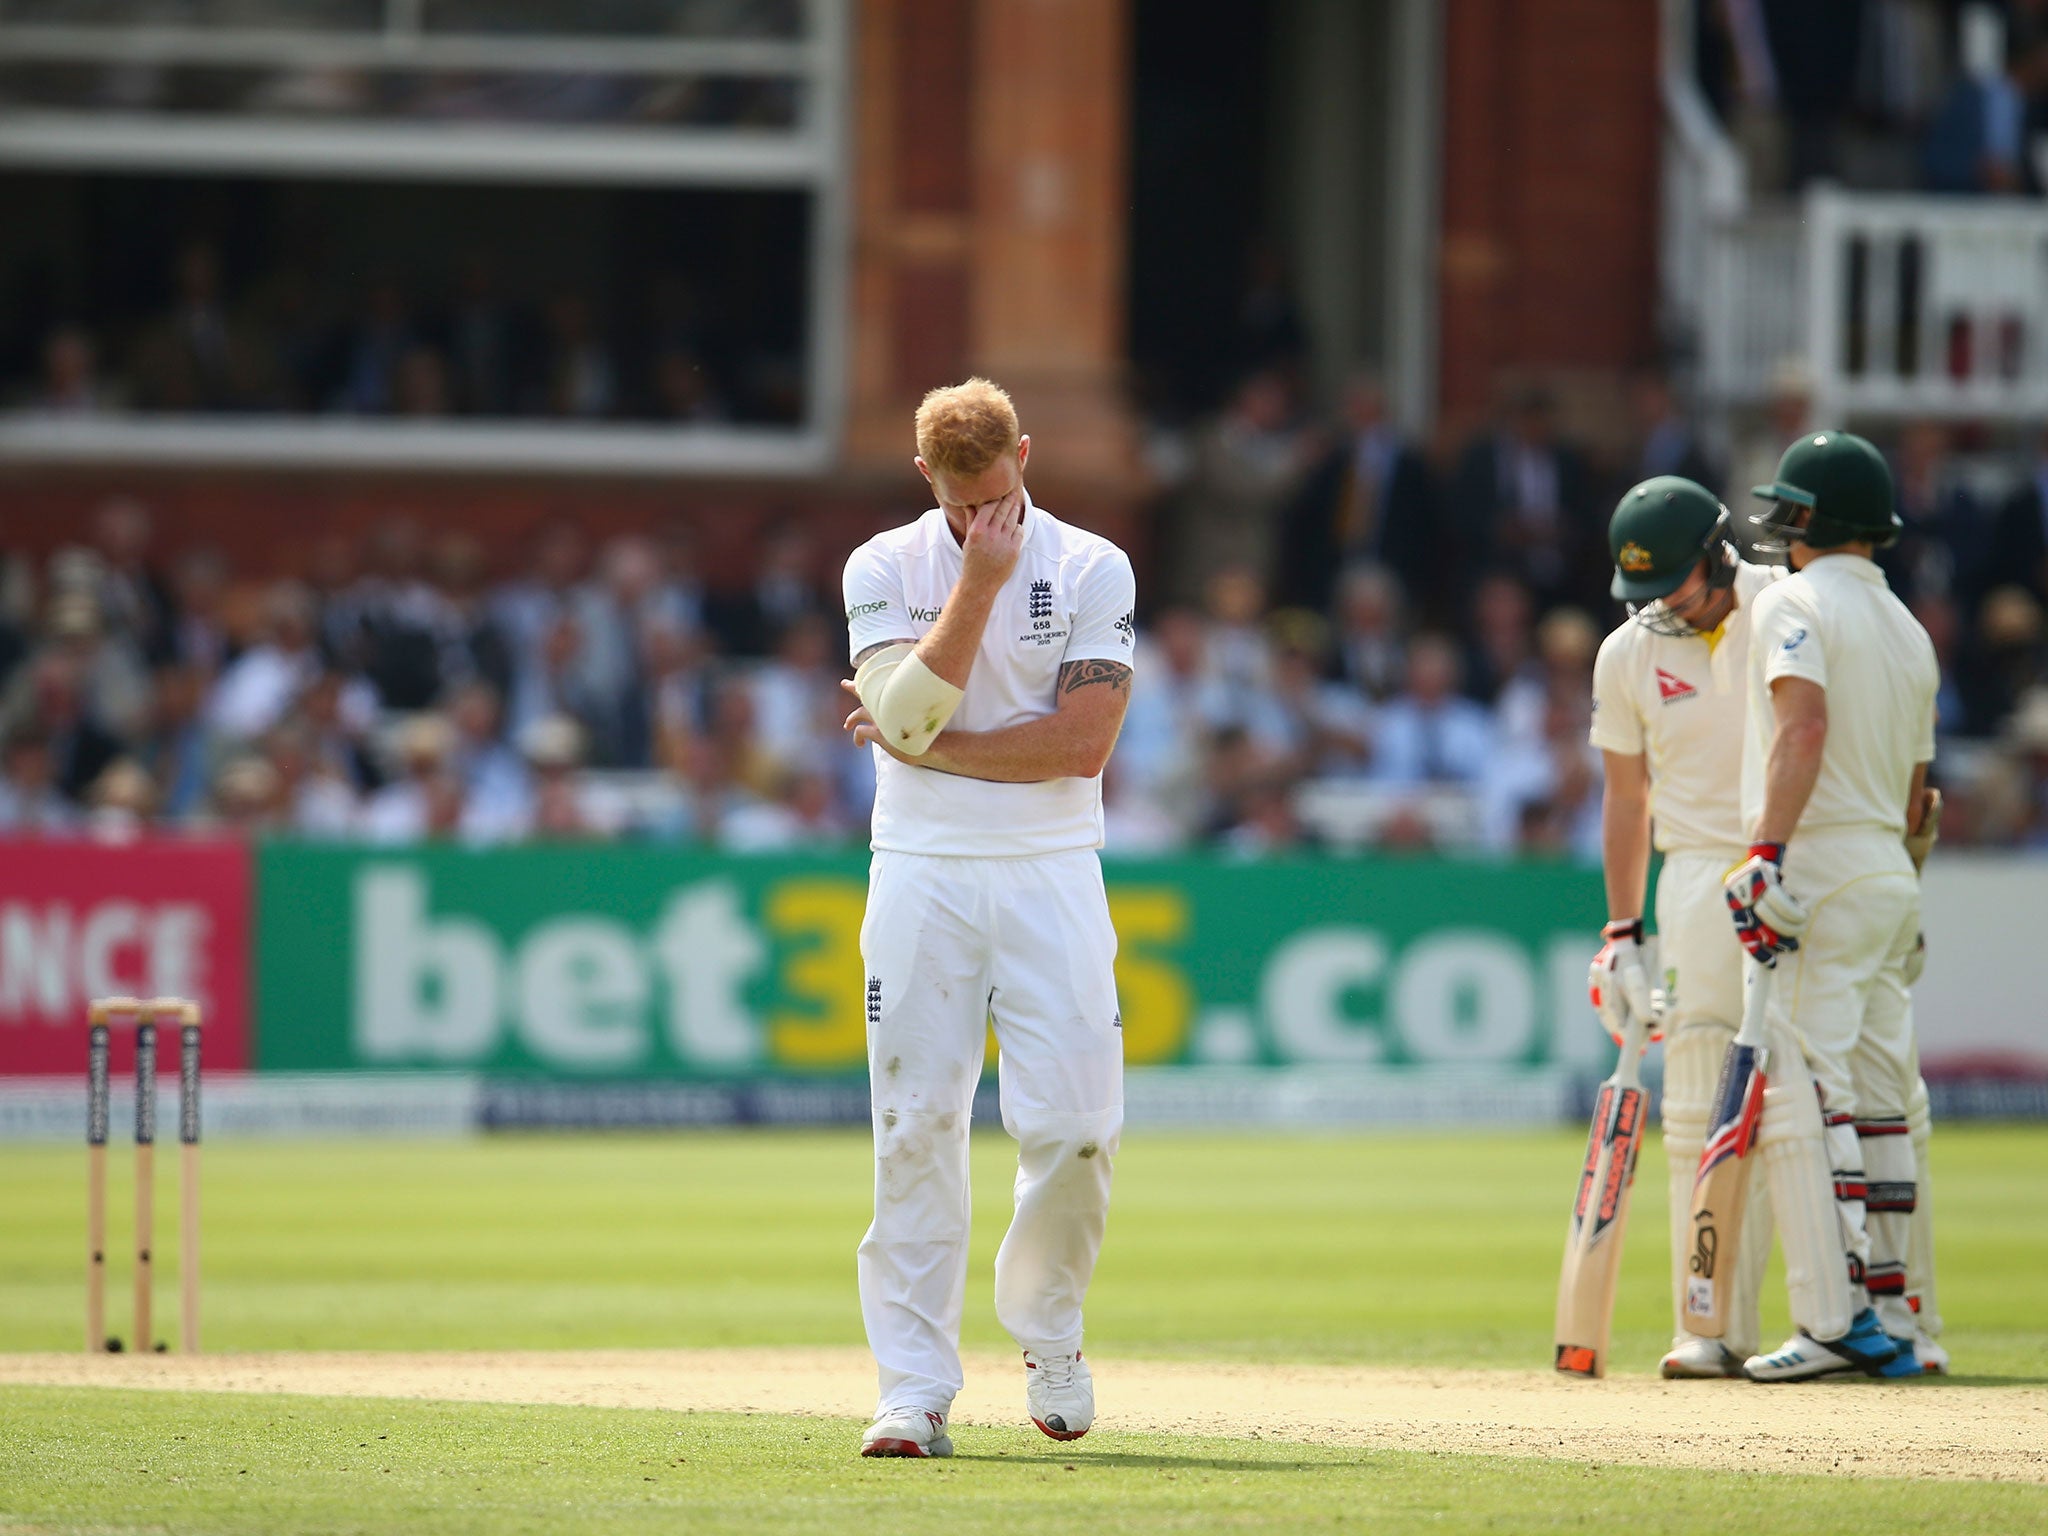 Ben Stokes reacts to a dropped catch by Ian Bell